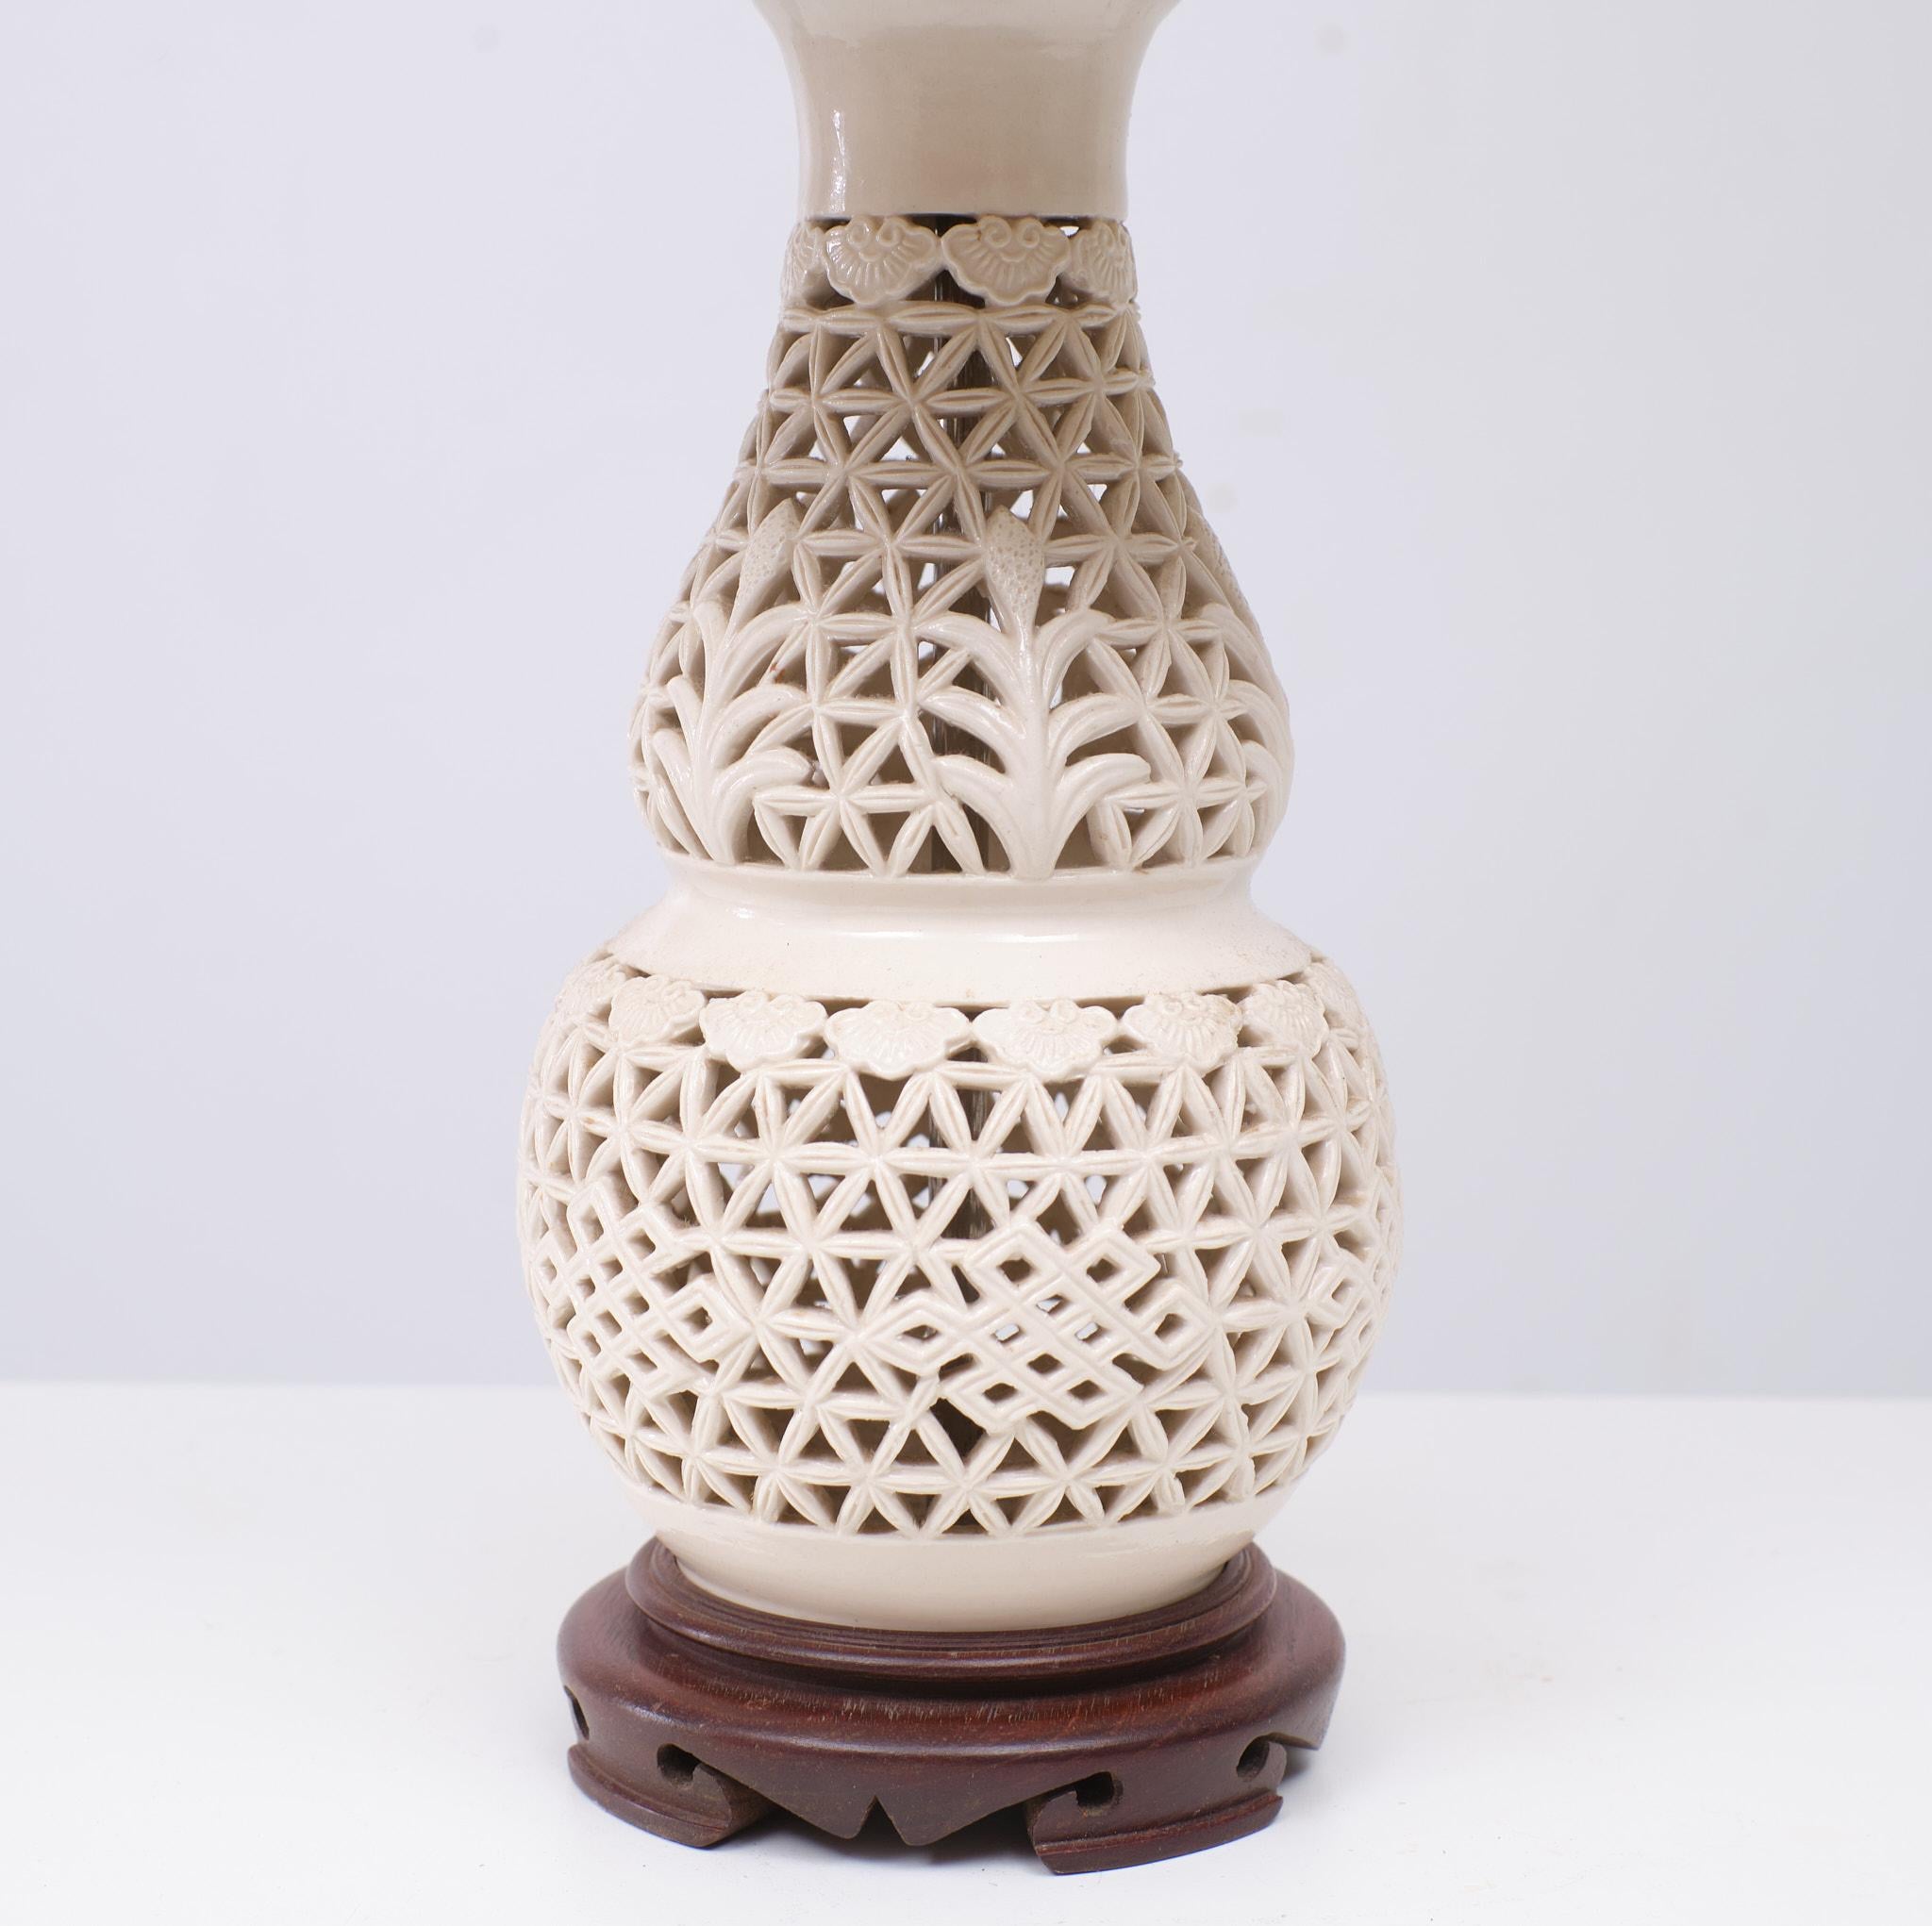 Blanc De Chine lamp in perfect, working condition. Openwork gloss off white ceramic 20th century, pierced porcelain vase form, brass mounts, on a wood base. Shades included. Clean and striking the off white ceramic displays an interesting open work